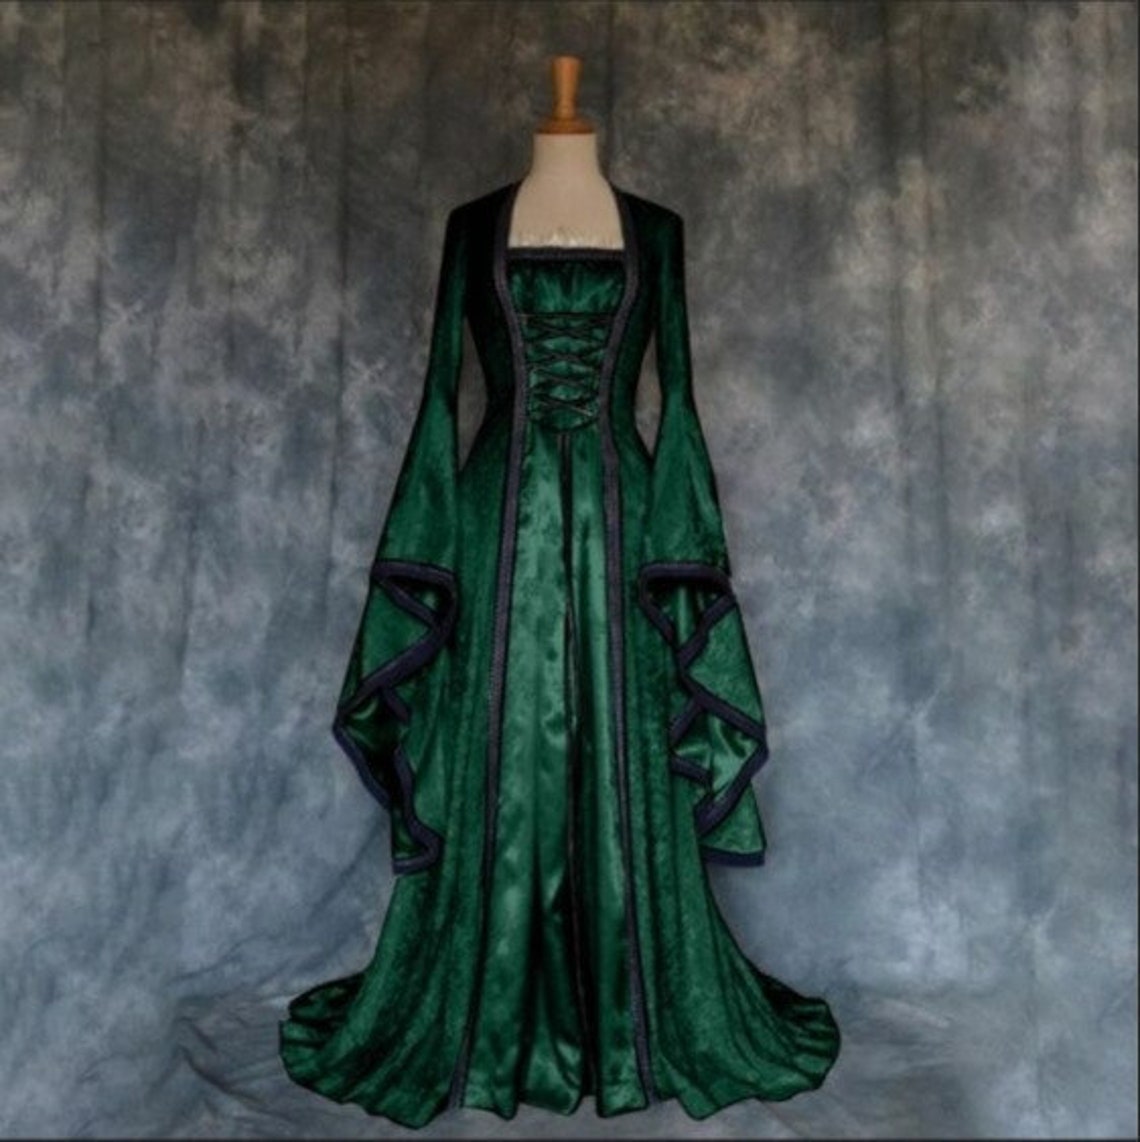 Medieval Witch Dress Women Scary Halloween Carnival Party - Etsy